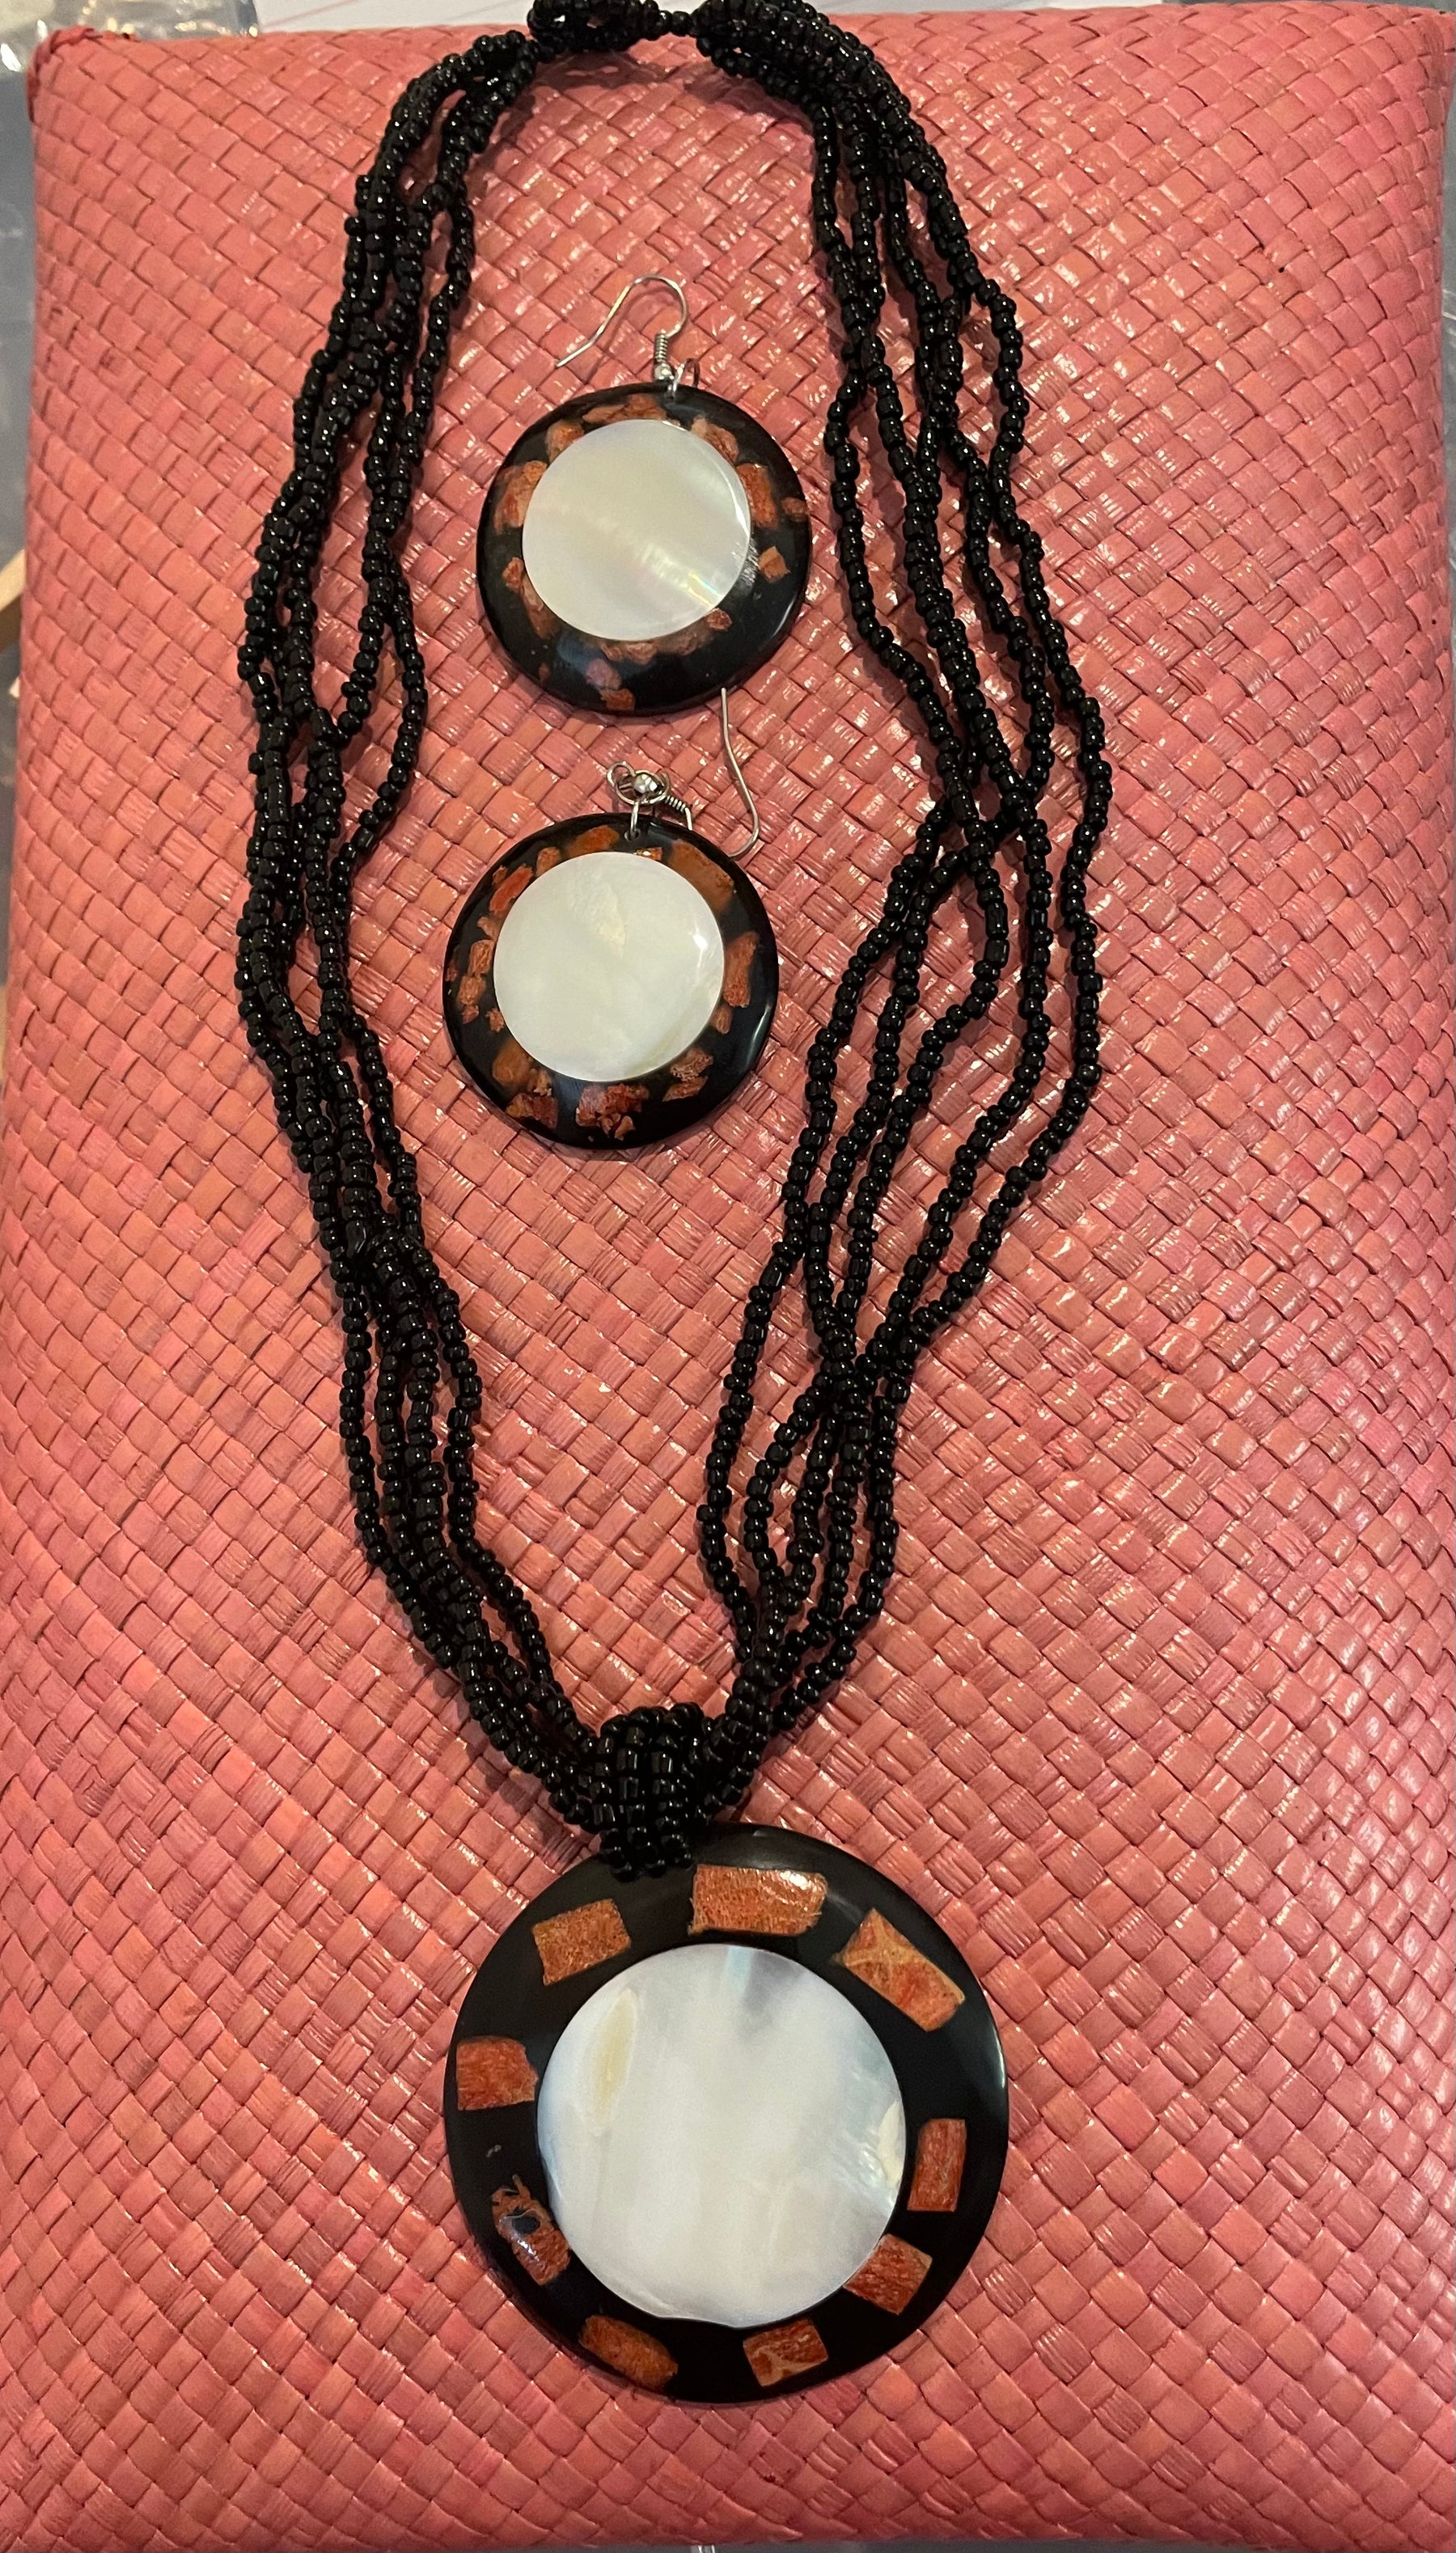 Round coconut with beads set